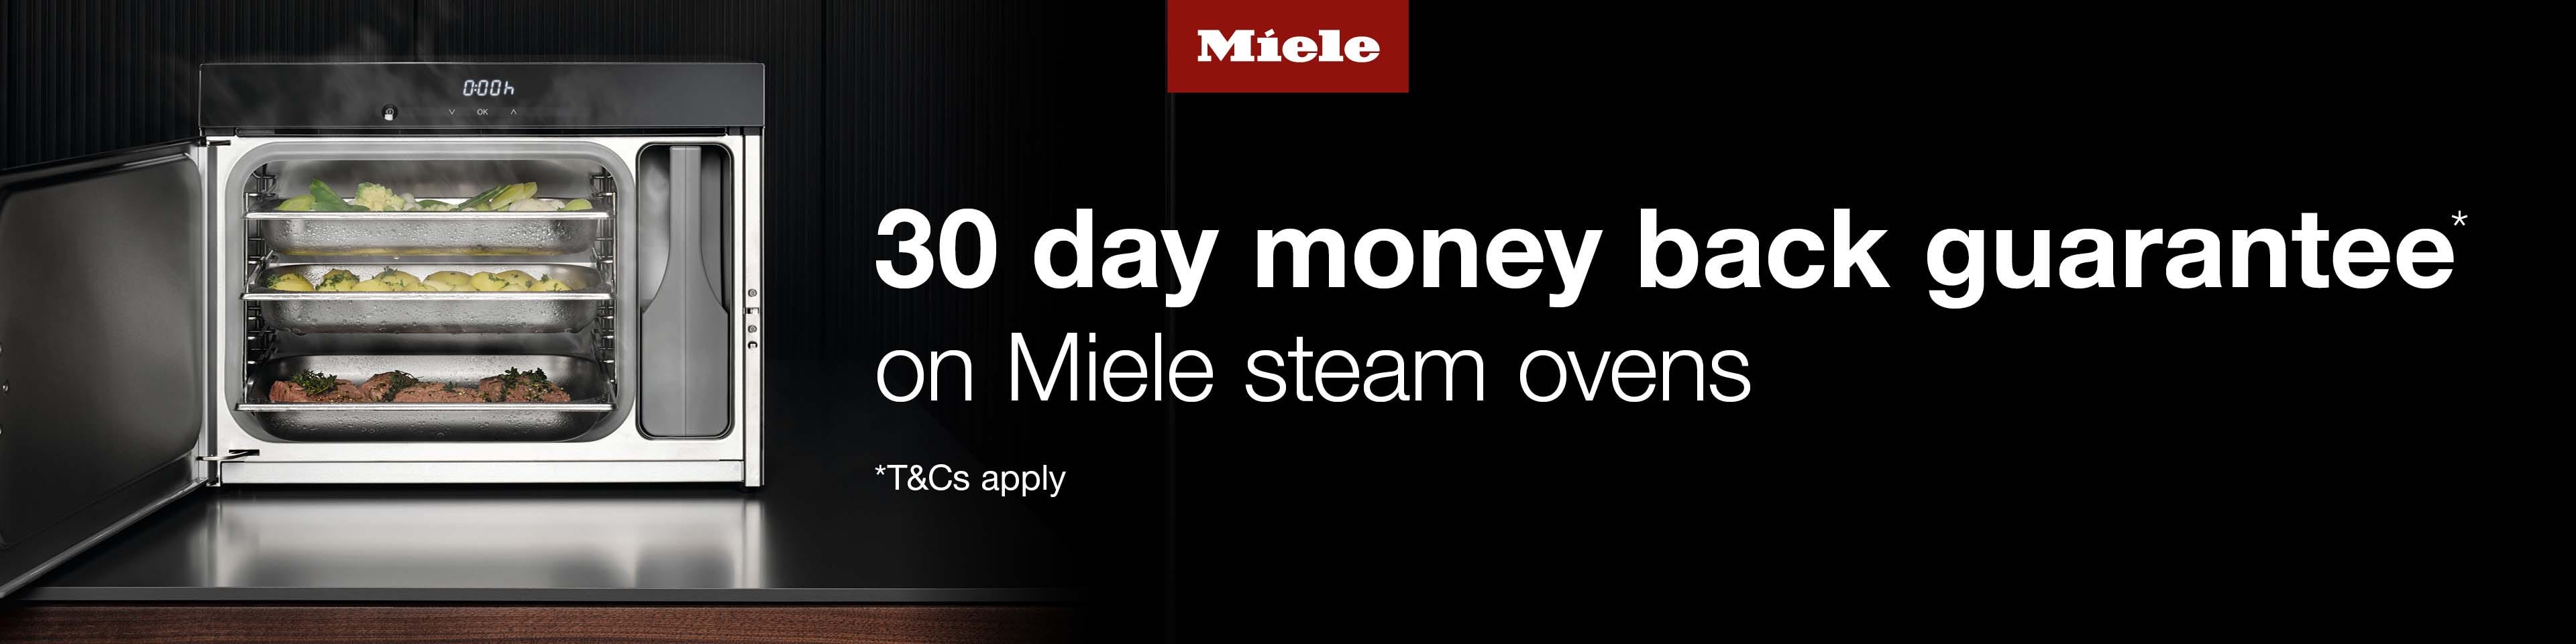 Get a 30 Day Money Back Guarantee* when you buy a Miele steam oven at e&s. T&Cs apply. Find out more at e&s today.